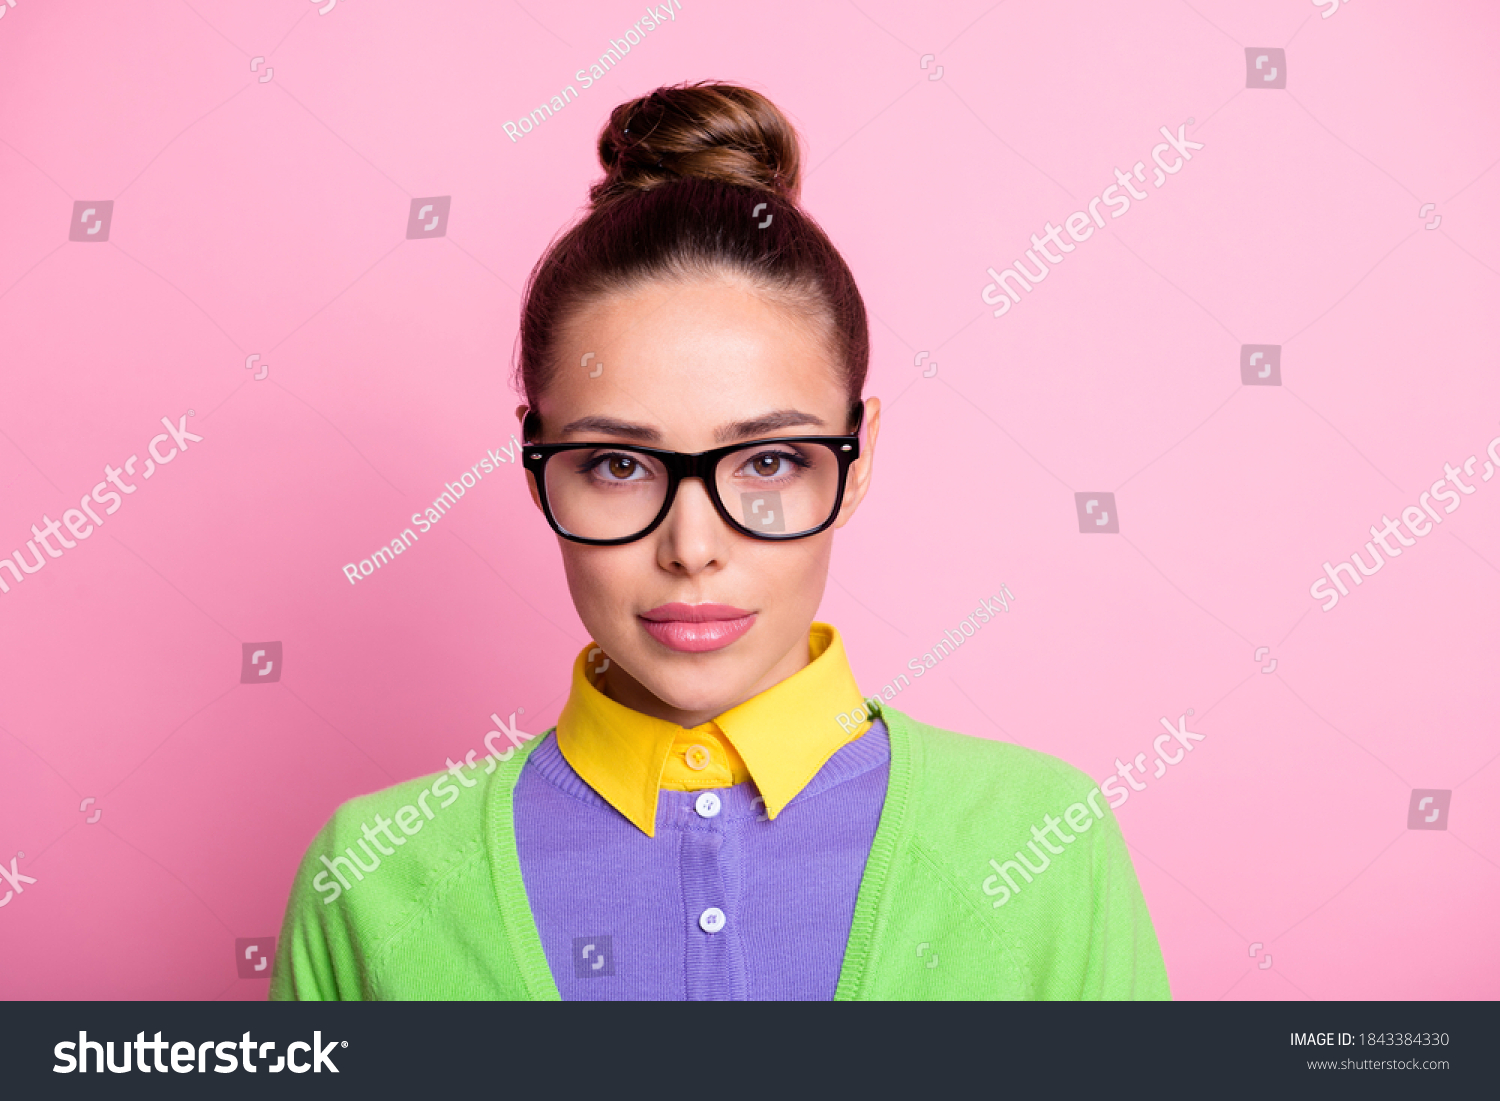 Closeup portrait photo of gorgeous lovely serious calm student girl knot hairstyle confident calm serious look camera lipstick wear glasses colored clothes bright pink color background #1843384330